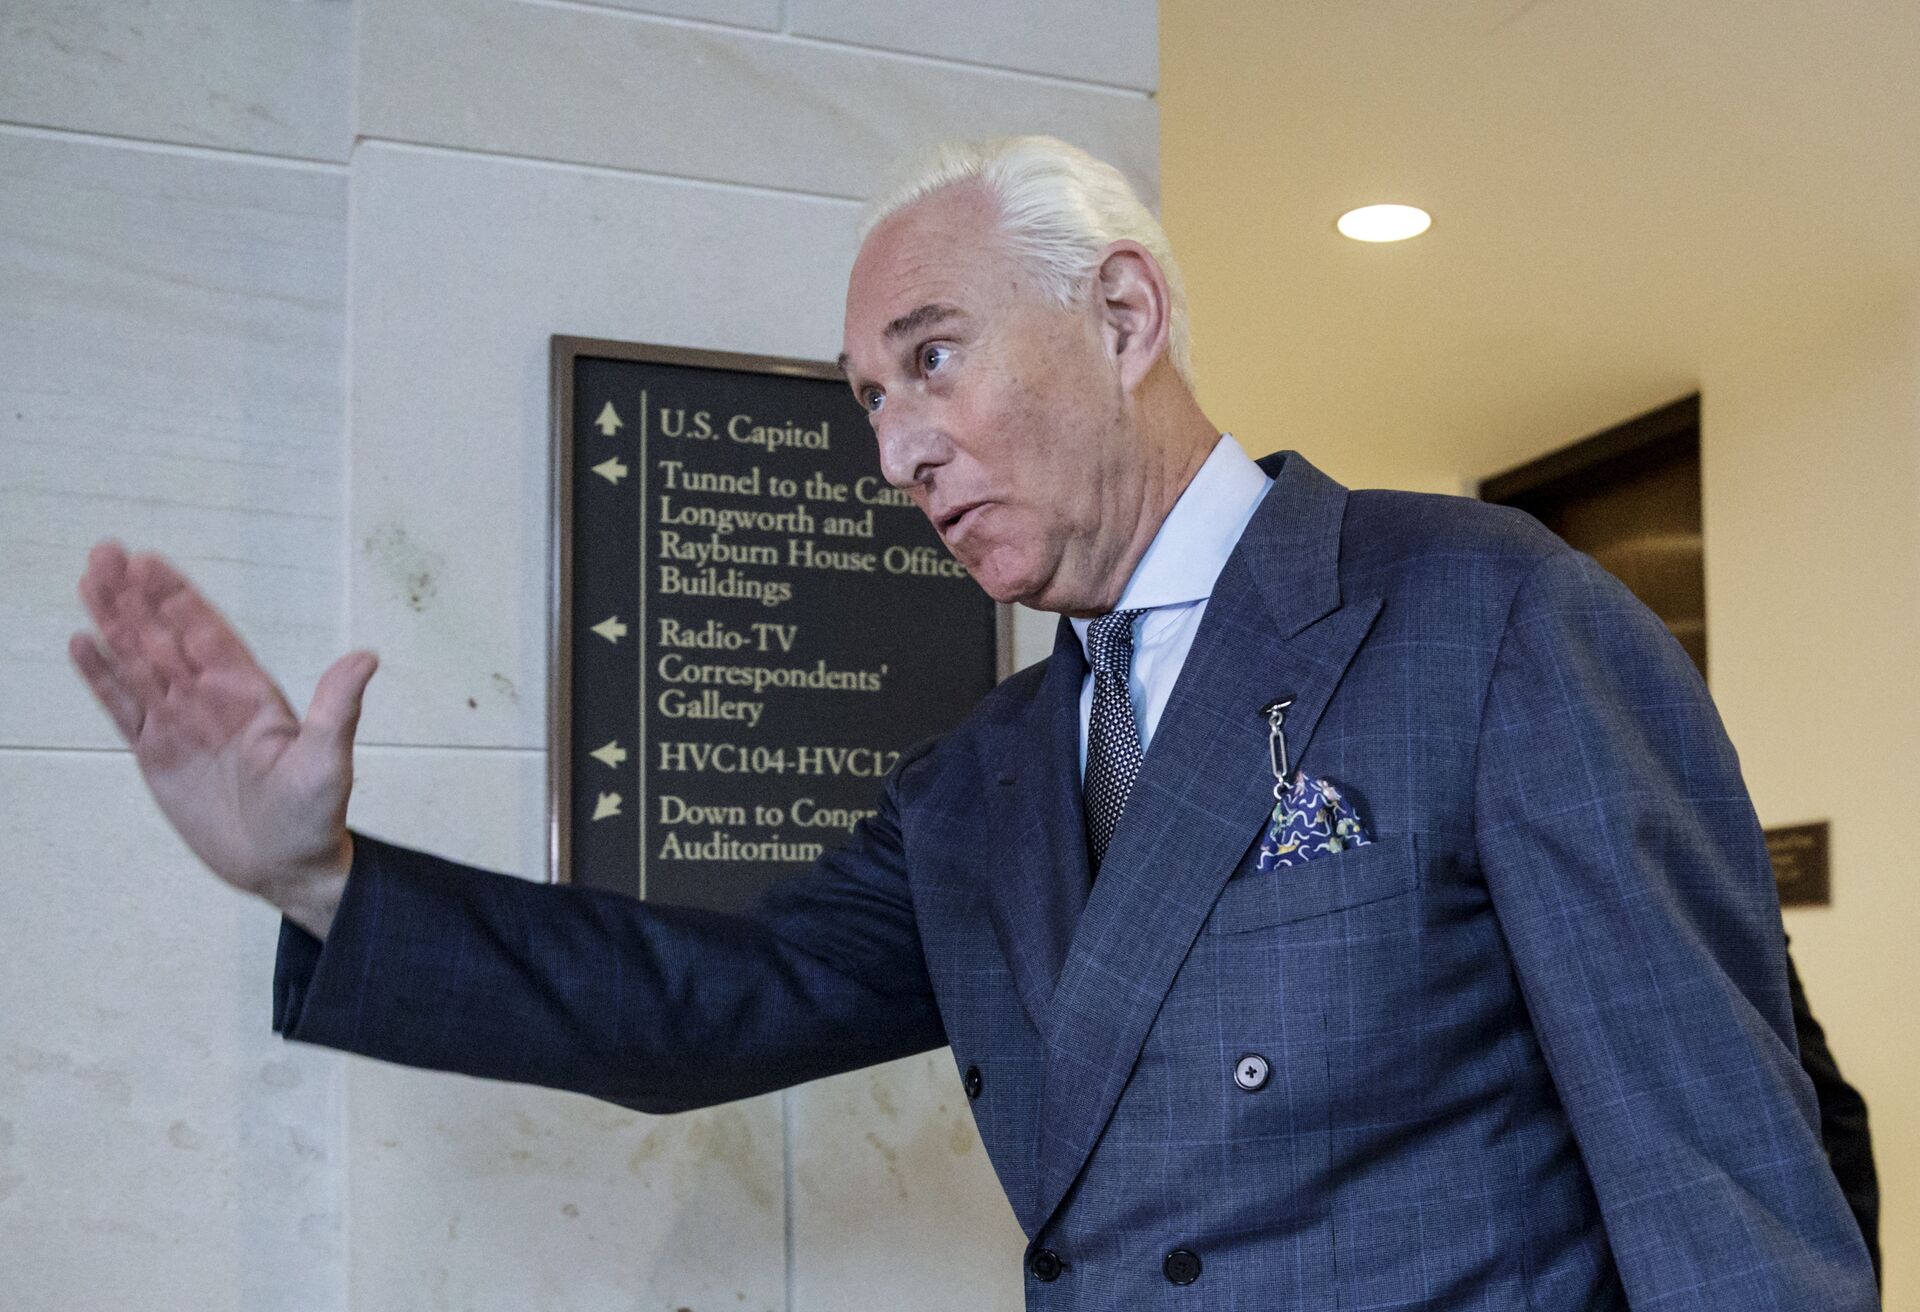 'Politically Motivated': Roger Stone Denounces Justice Department for Suing Him Over Unpaid Taxes - Sputnik International, 1920, 17.04.2021